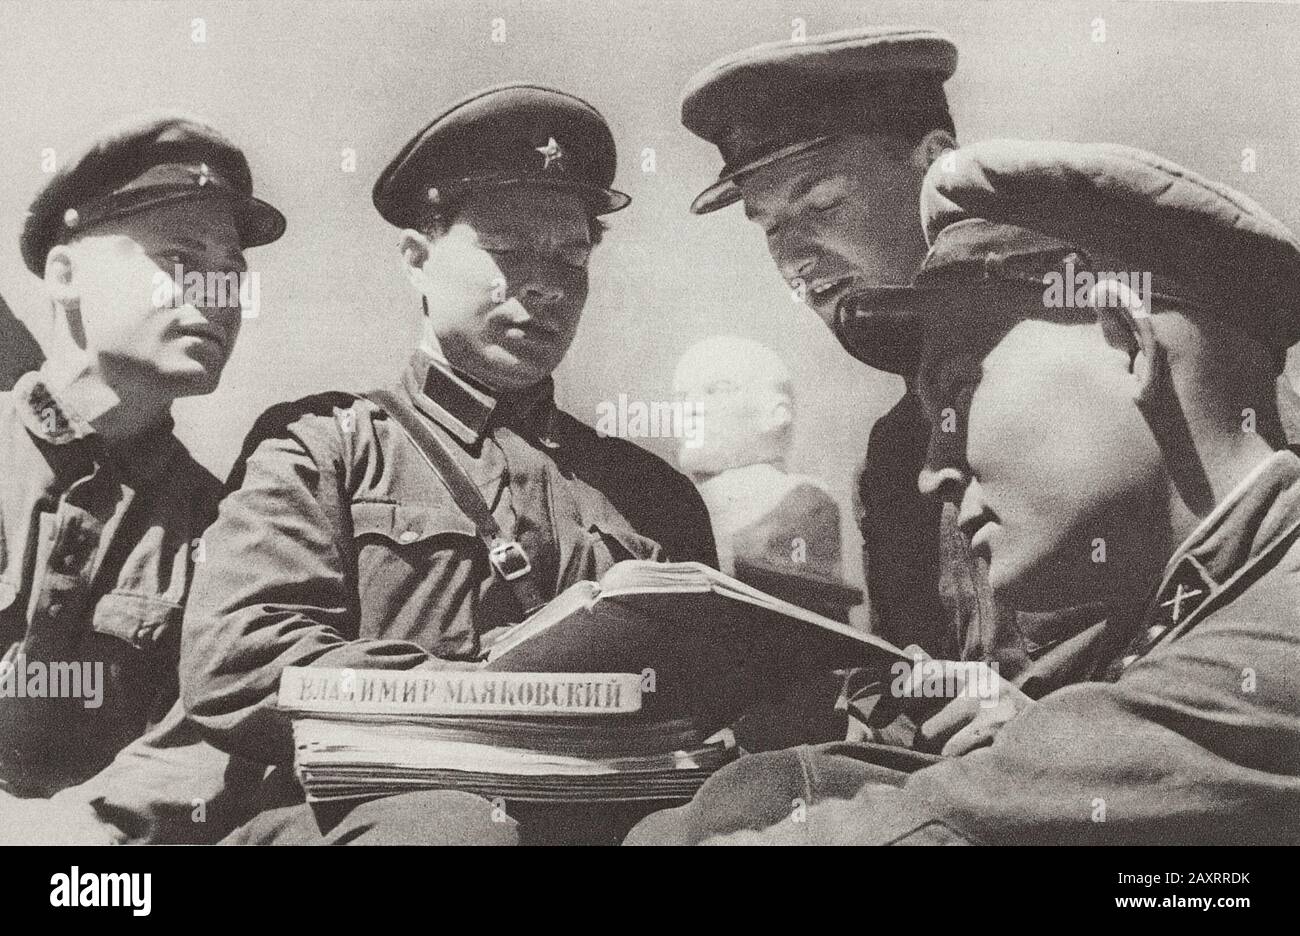 Red Army in 1930s. From soviet propaganda book of 1937. Сultural education in Red Army Stock Photo